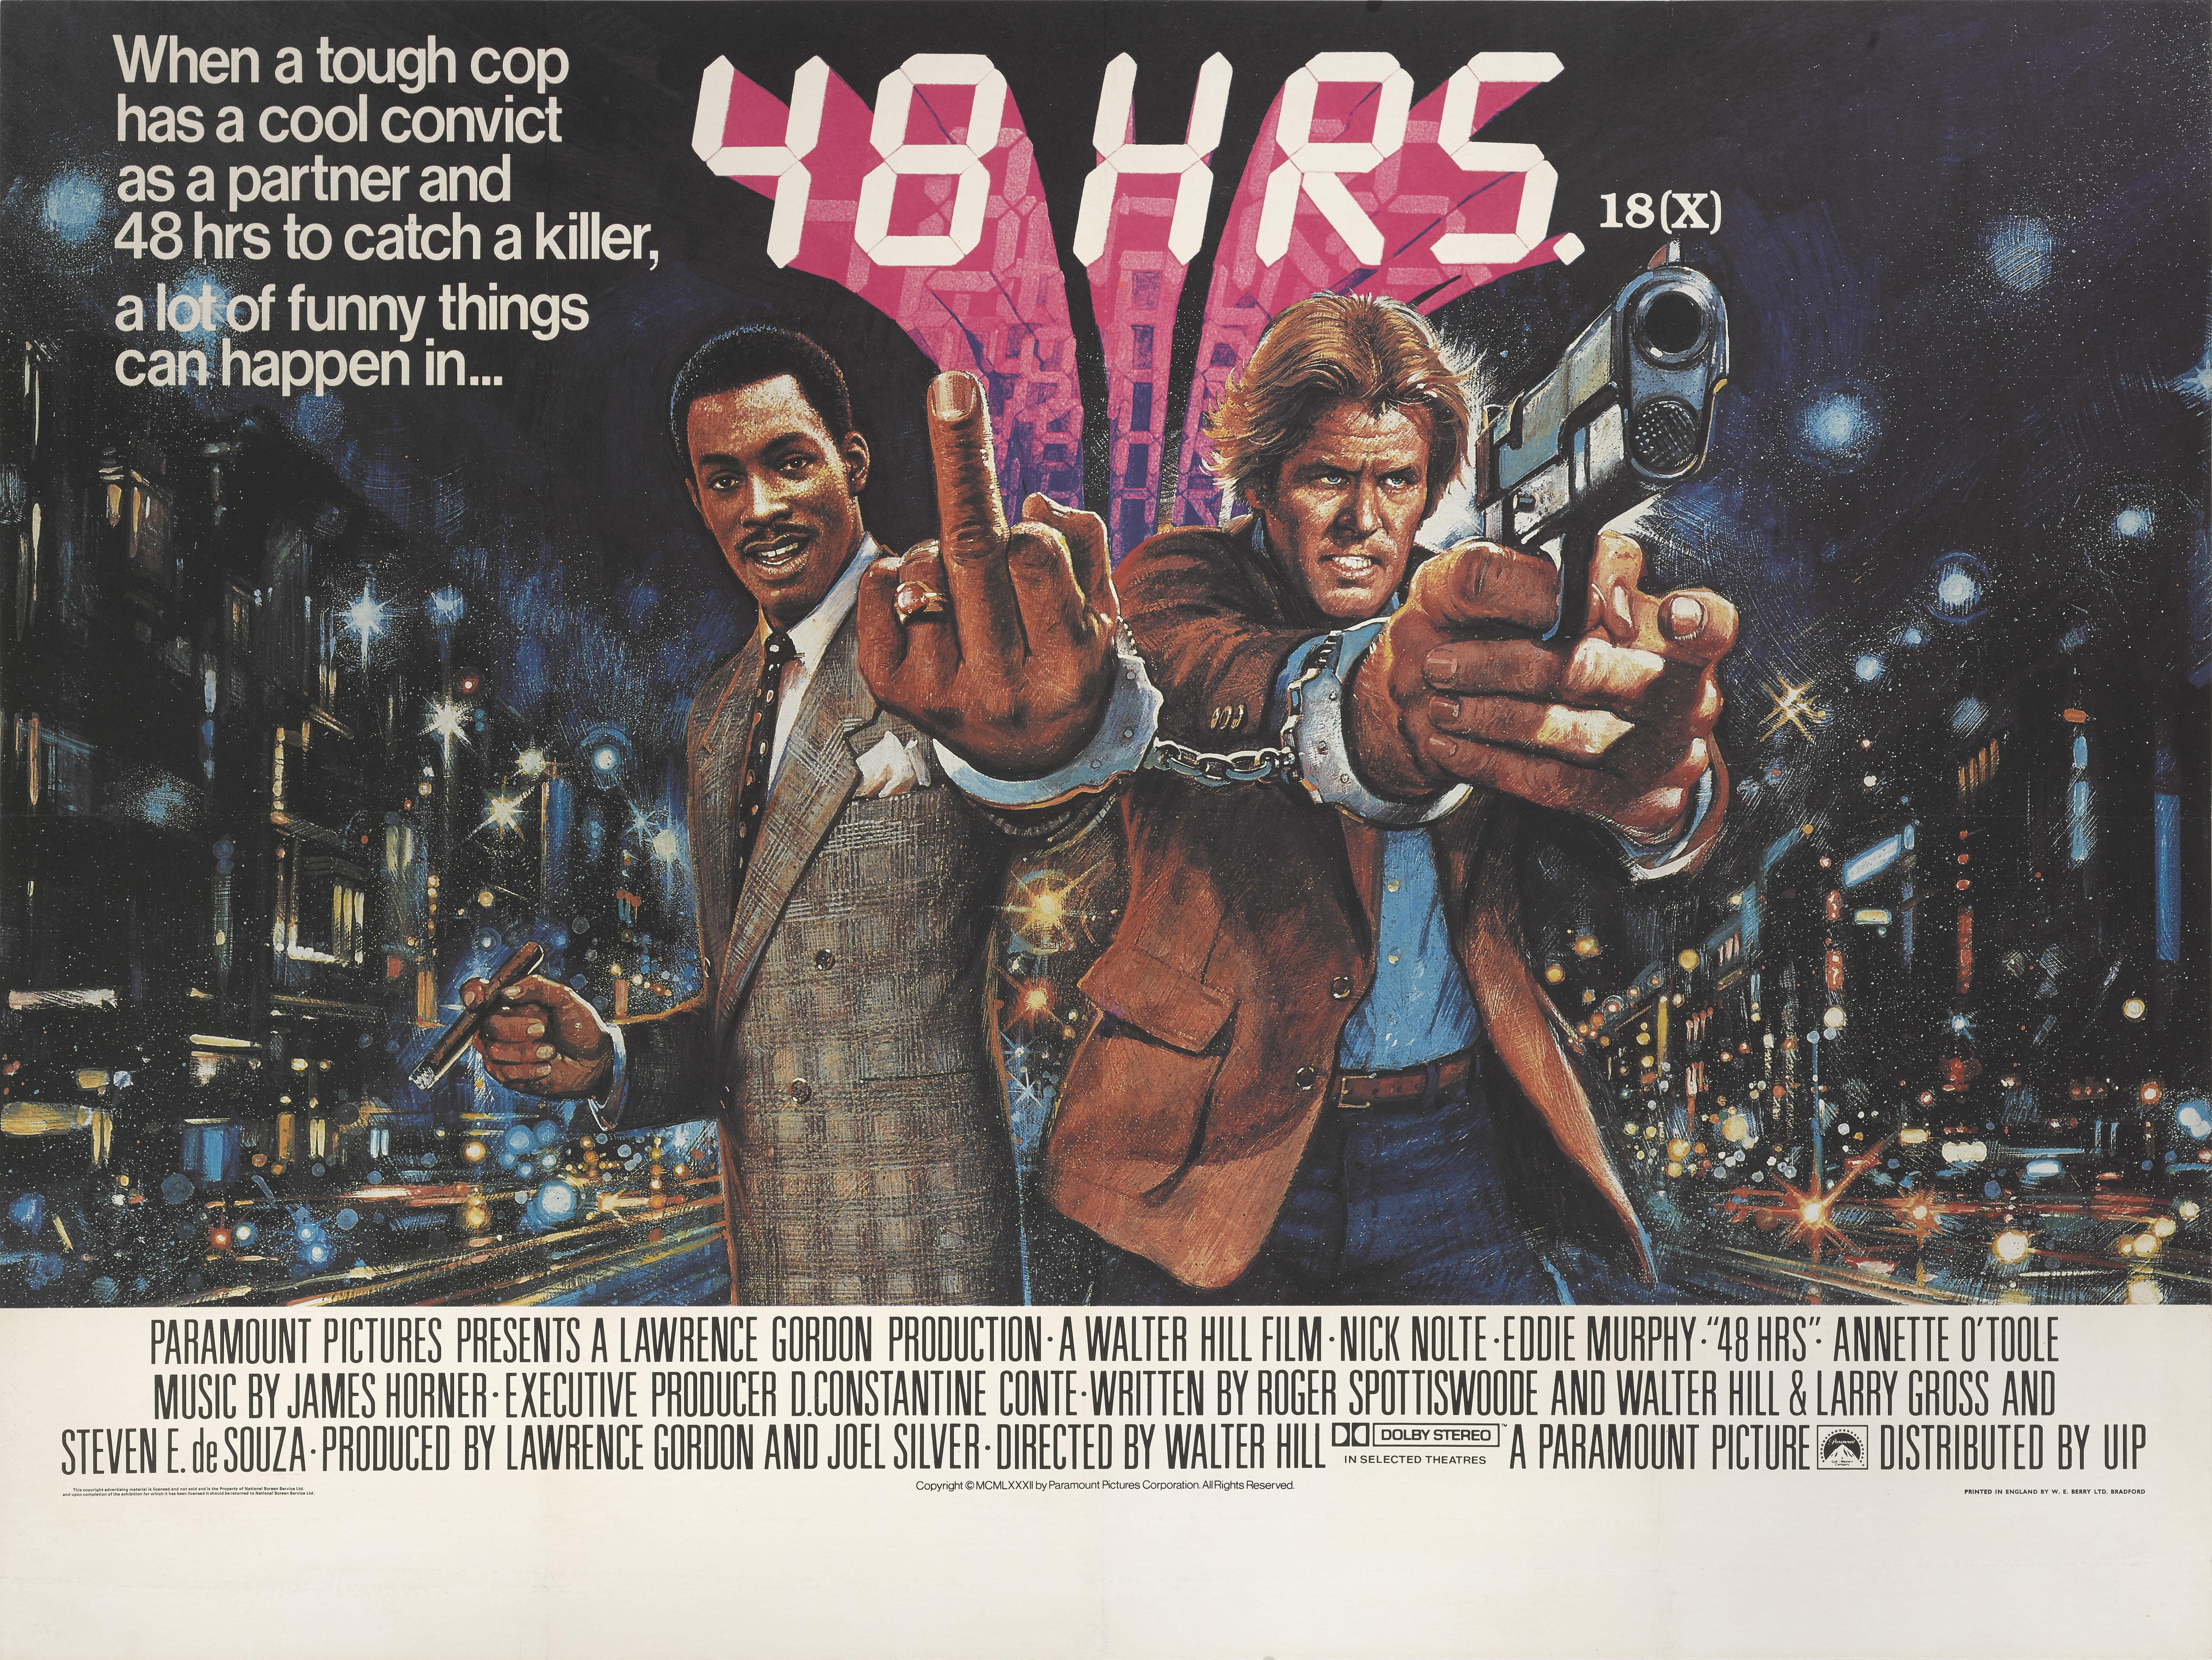 Original British film poster for 1982 action ,comedy 48 Hours starring Nick Nolte and Eddie Murphy. The film was directed by Walter Hill.
This poster is conservation linen backed and would be shipped rolled in a strong tube and shipped by Federal